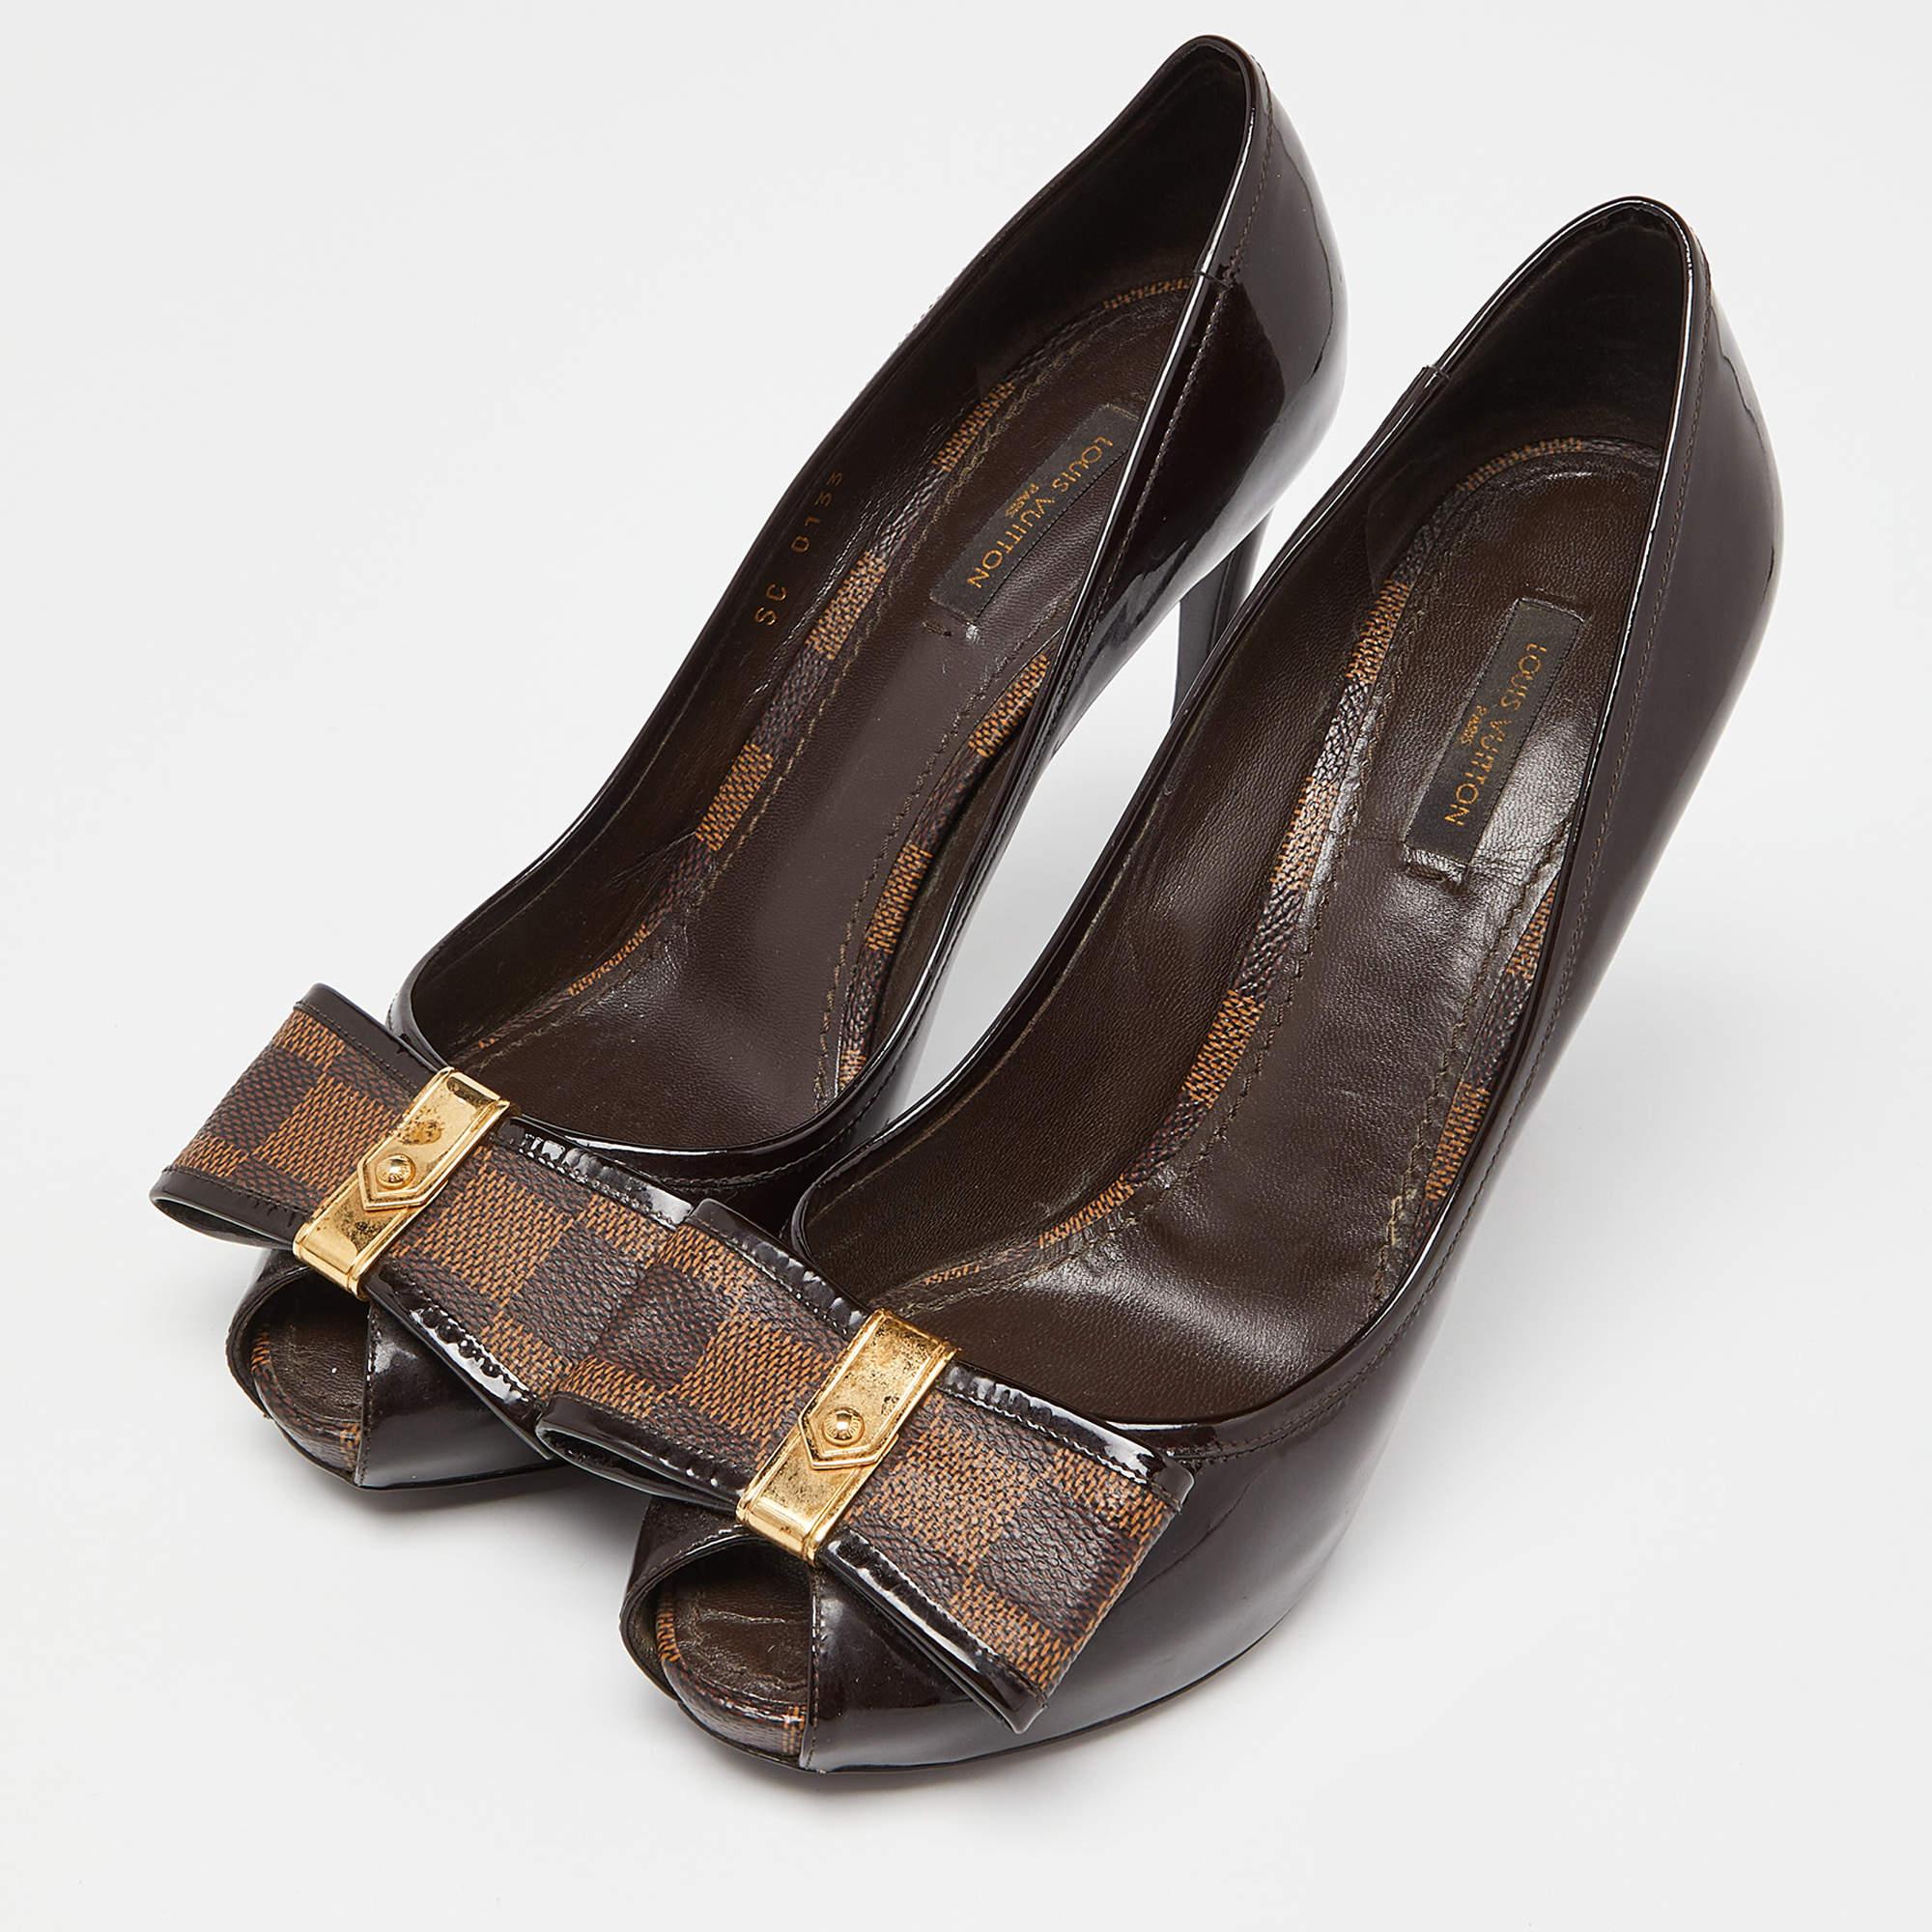 Exhibit an elegant style with this pair of pumps. These LV peep-toe shoes for women are crafted from quality materials. They are set on durable soles and sleek heels.

